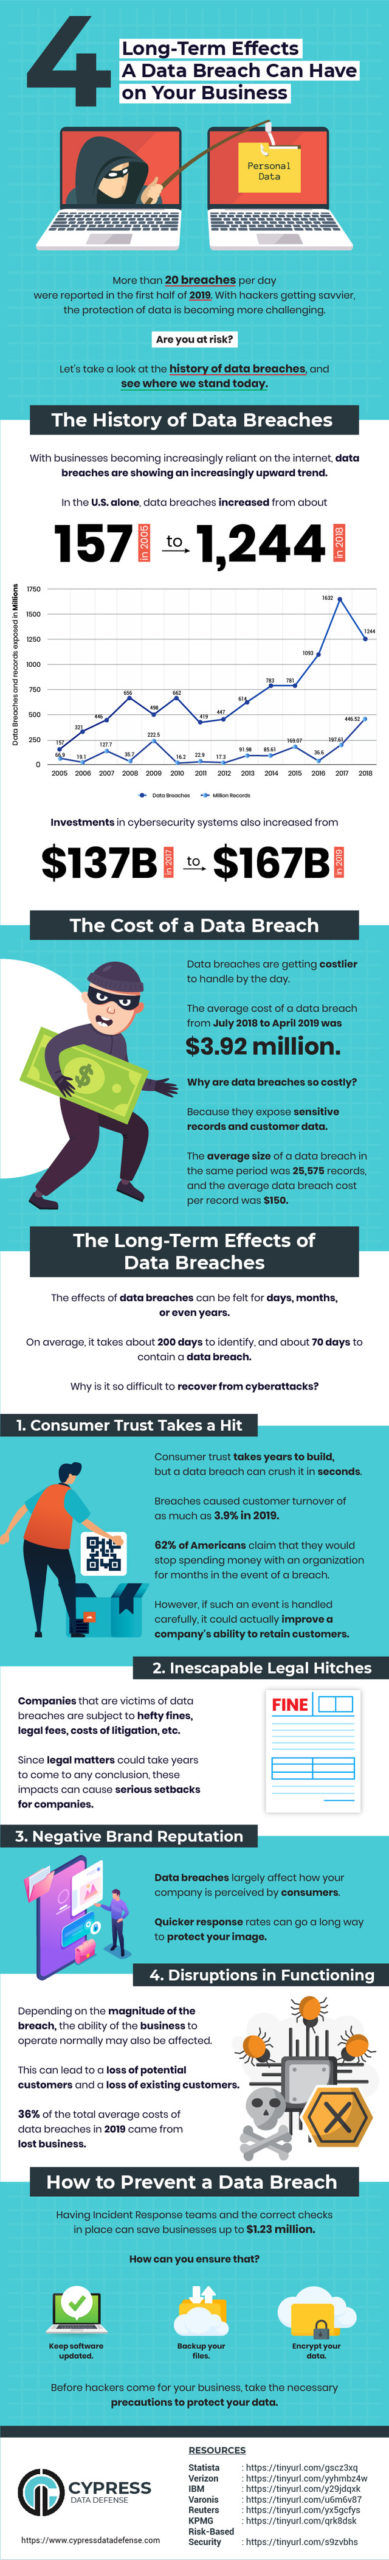 Effects-a-Data-Breach-Can-Have-on-Your-Business-in-the-Long-Term-Infographic